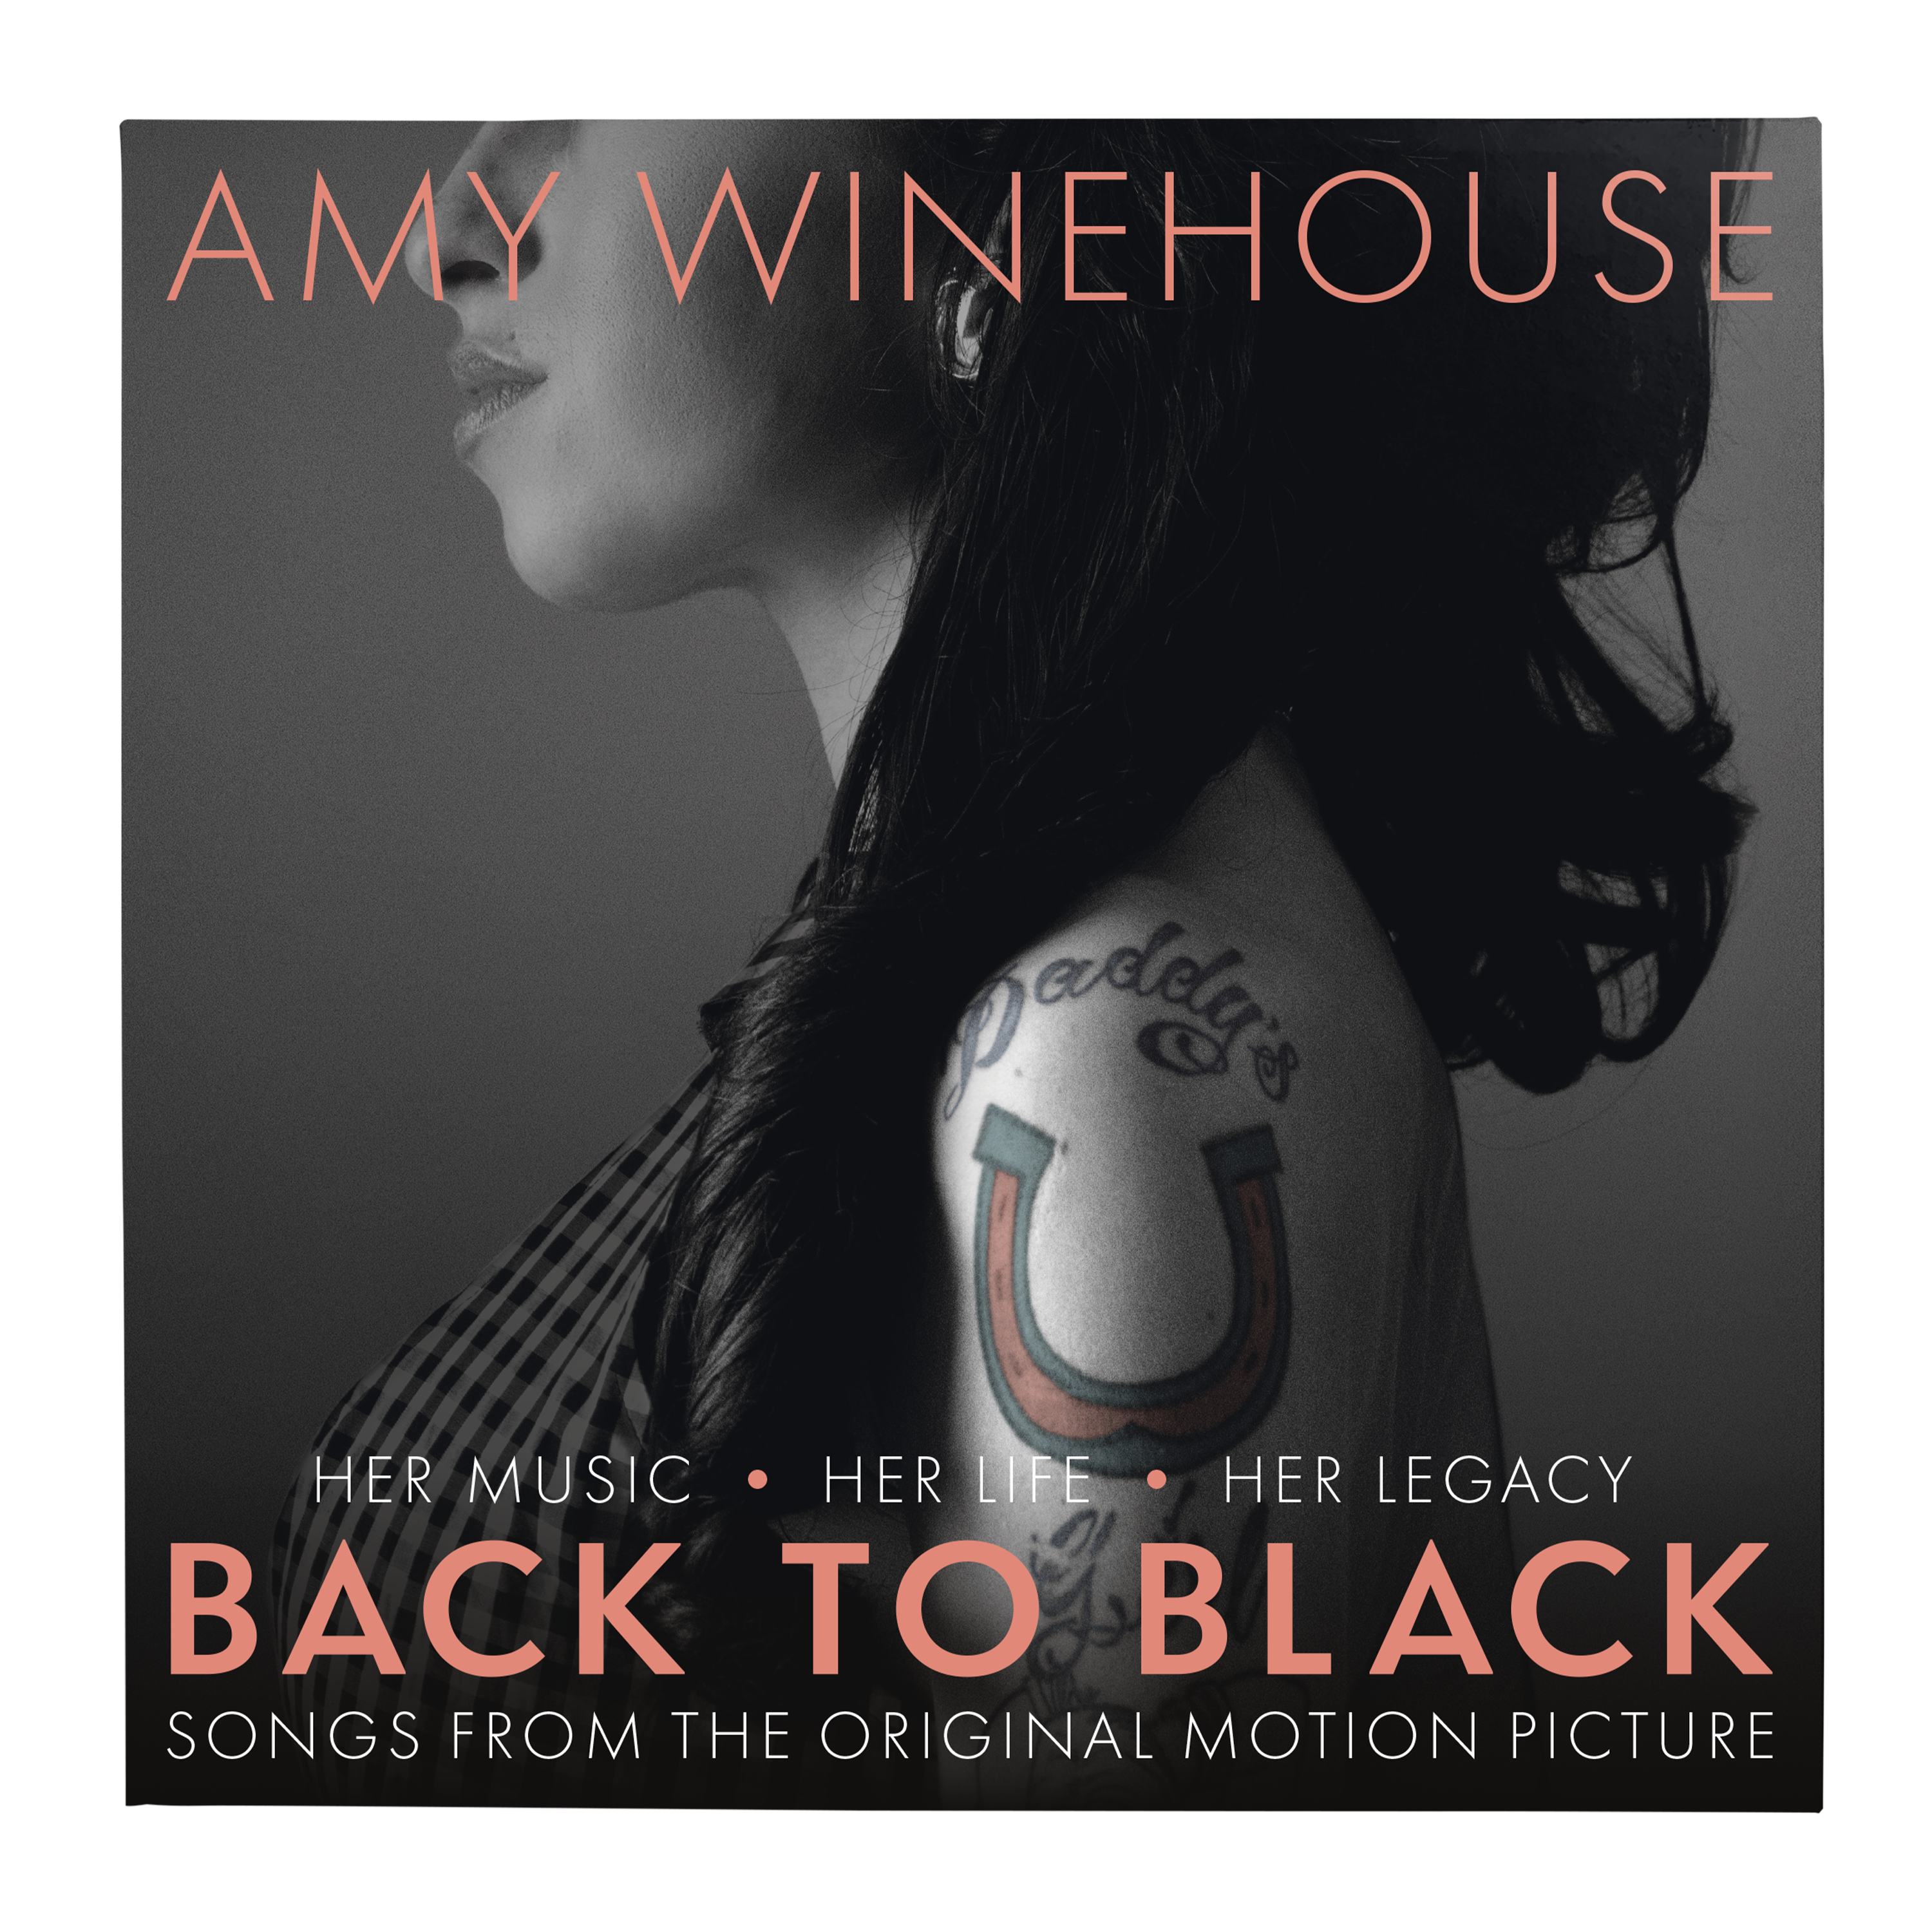 Original Soundtrack - Back To Black - Songs from the Original Motion Picture: Vinyl 2LP